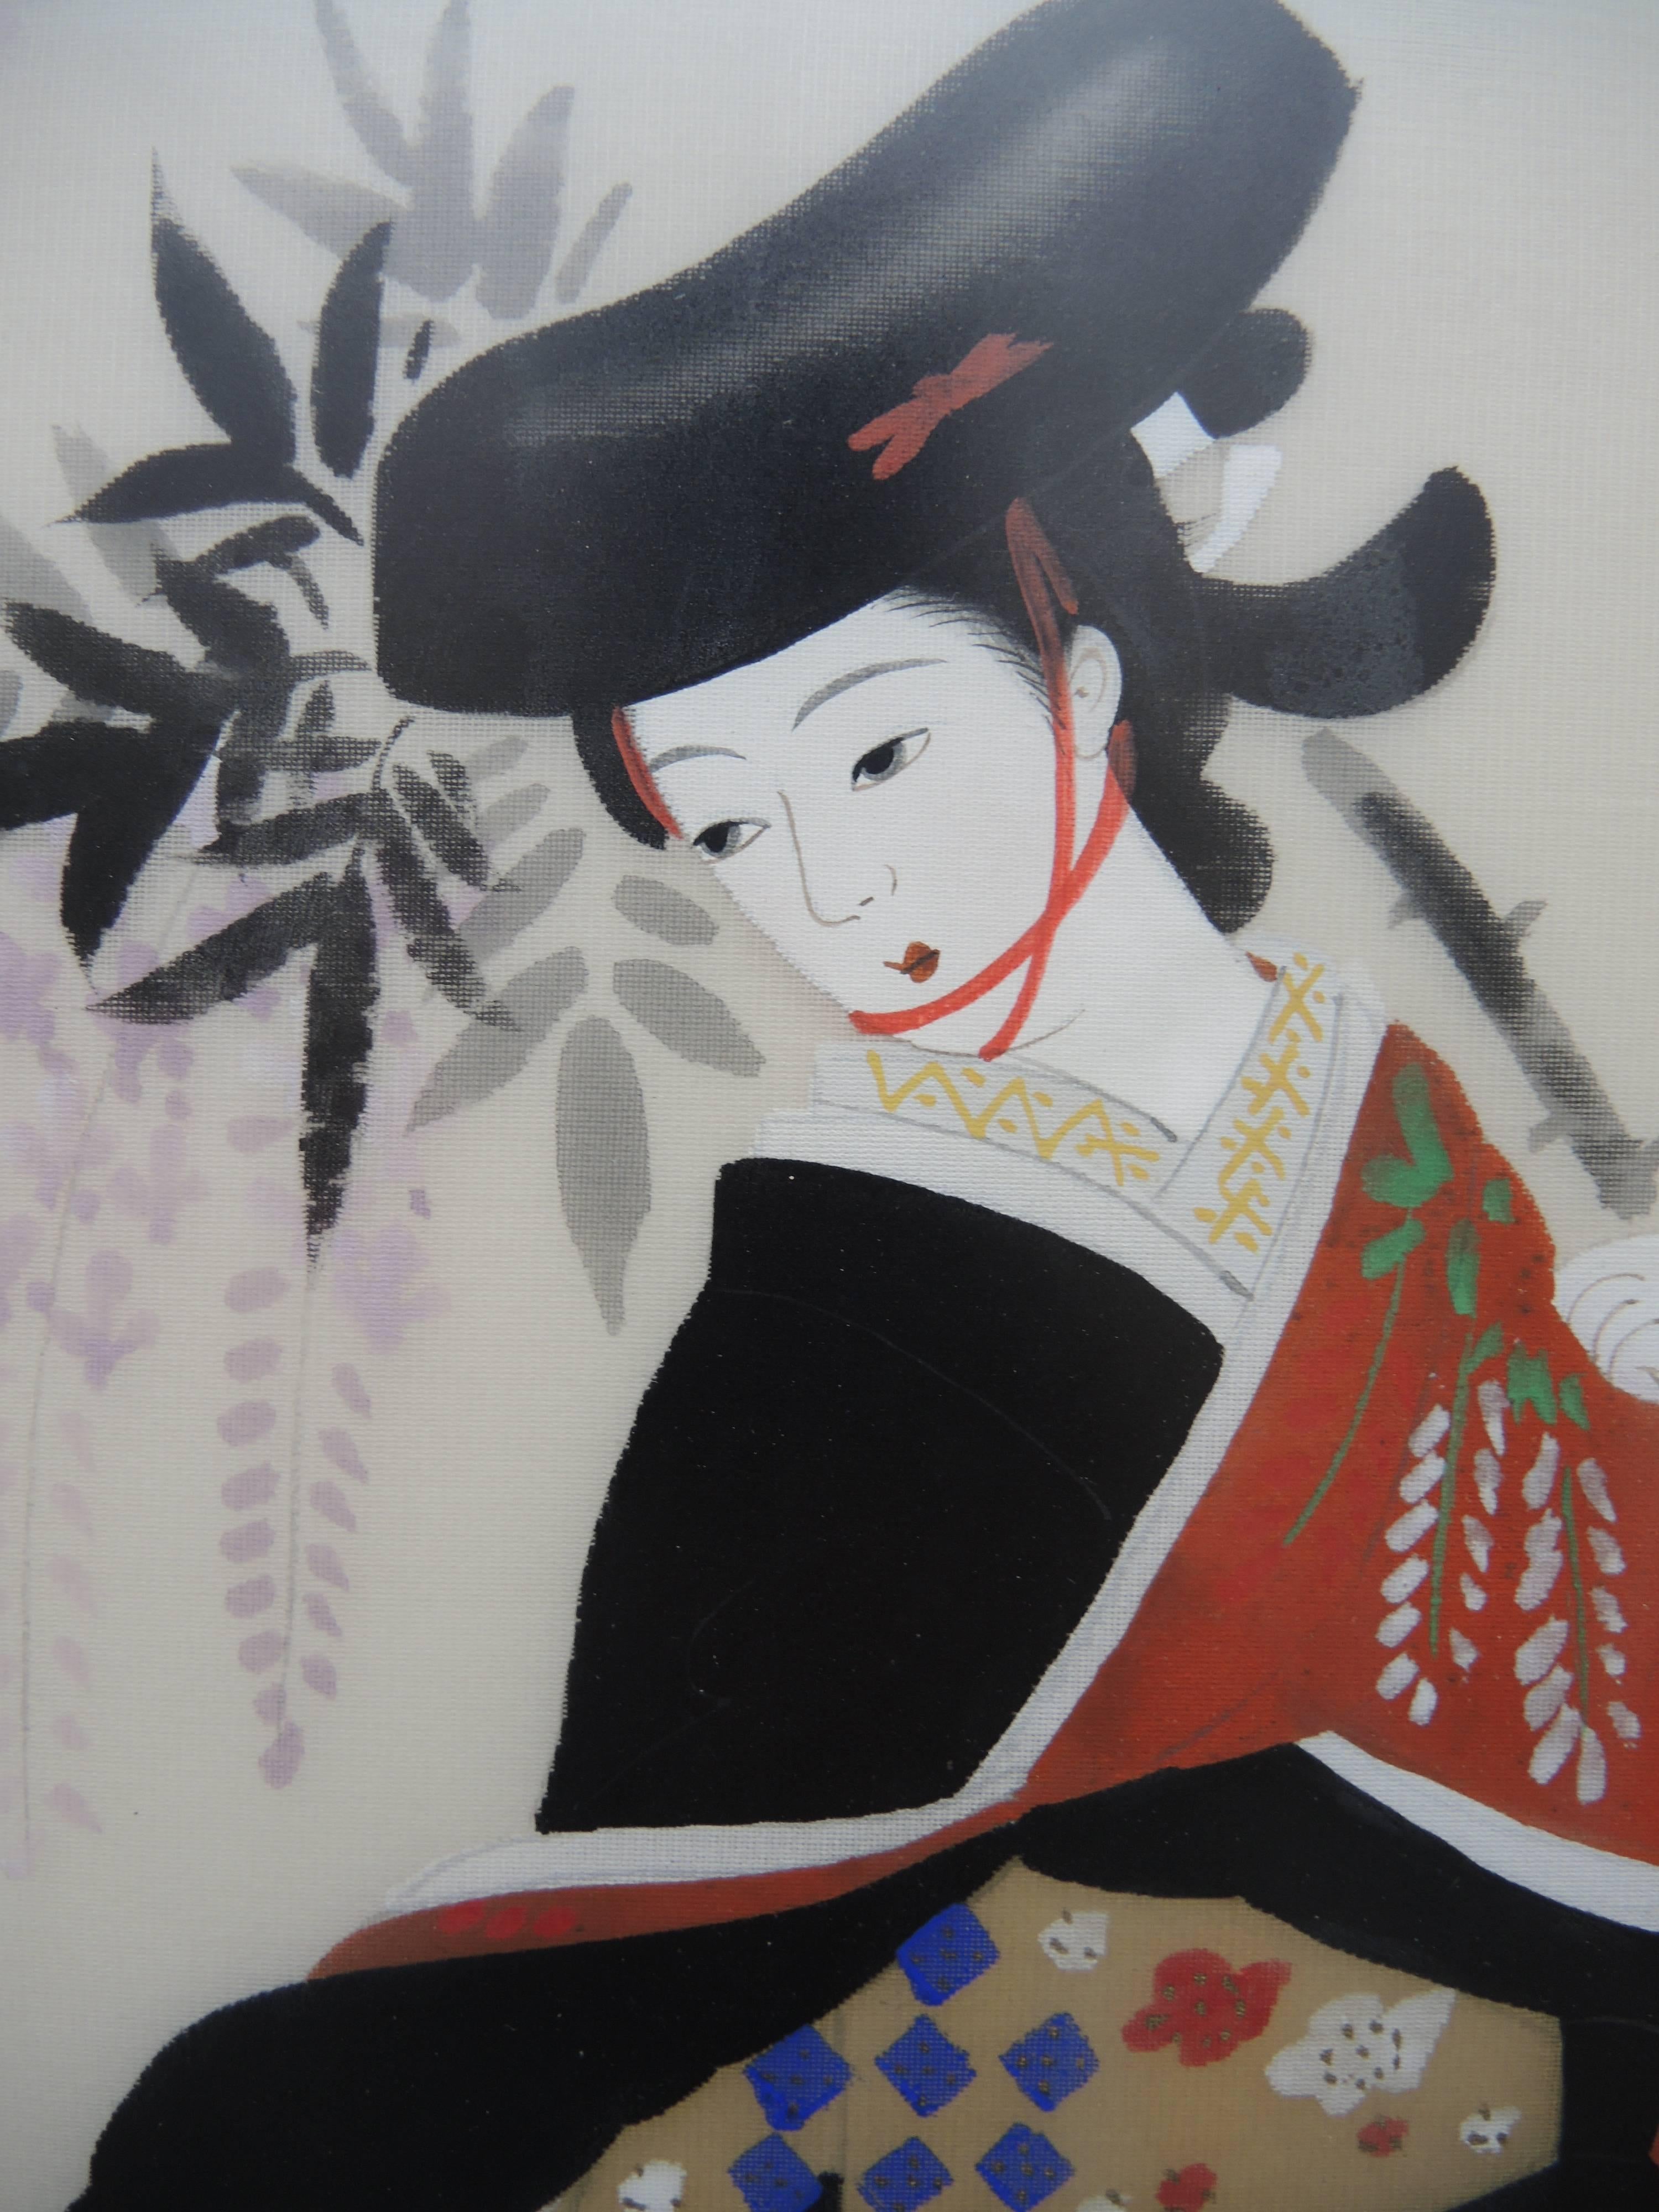 Circa 1950 Japanese painting on silk of a Geisha in traditional kimono .The stylised graphic designs of the kimono paired with the traditional painting style of the face are indicative of the mid century style of painting in